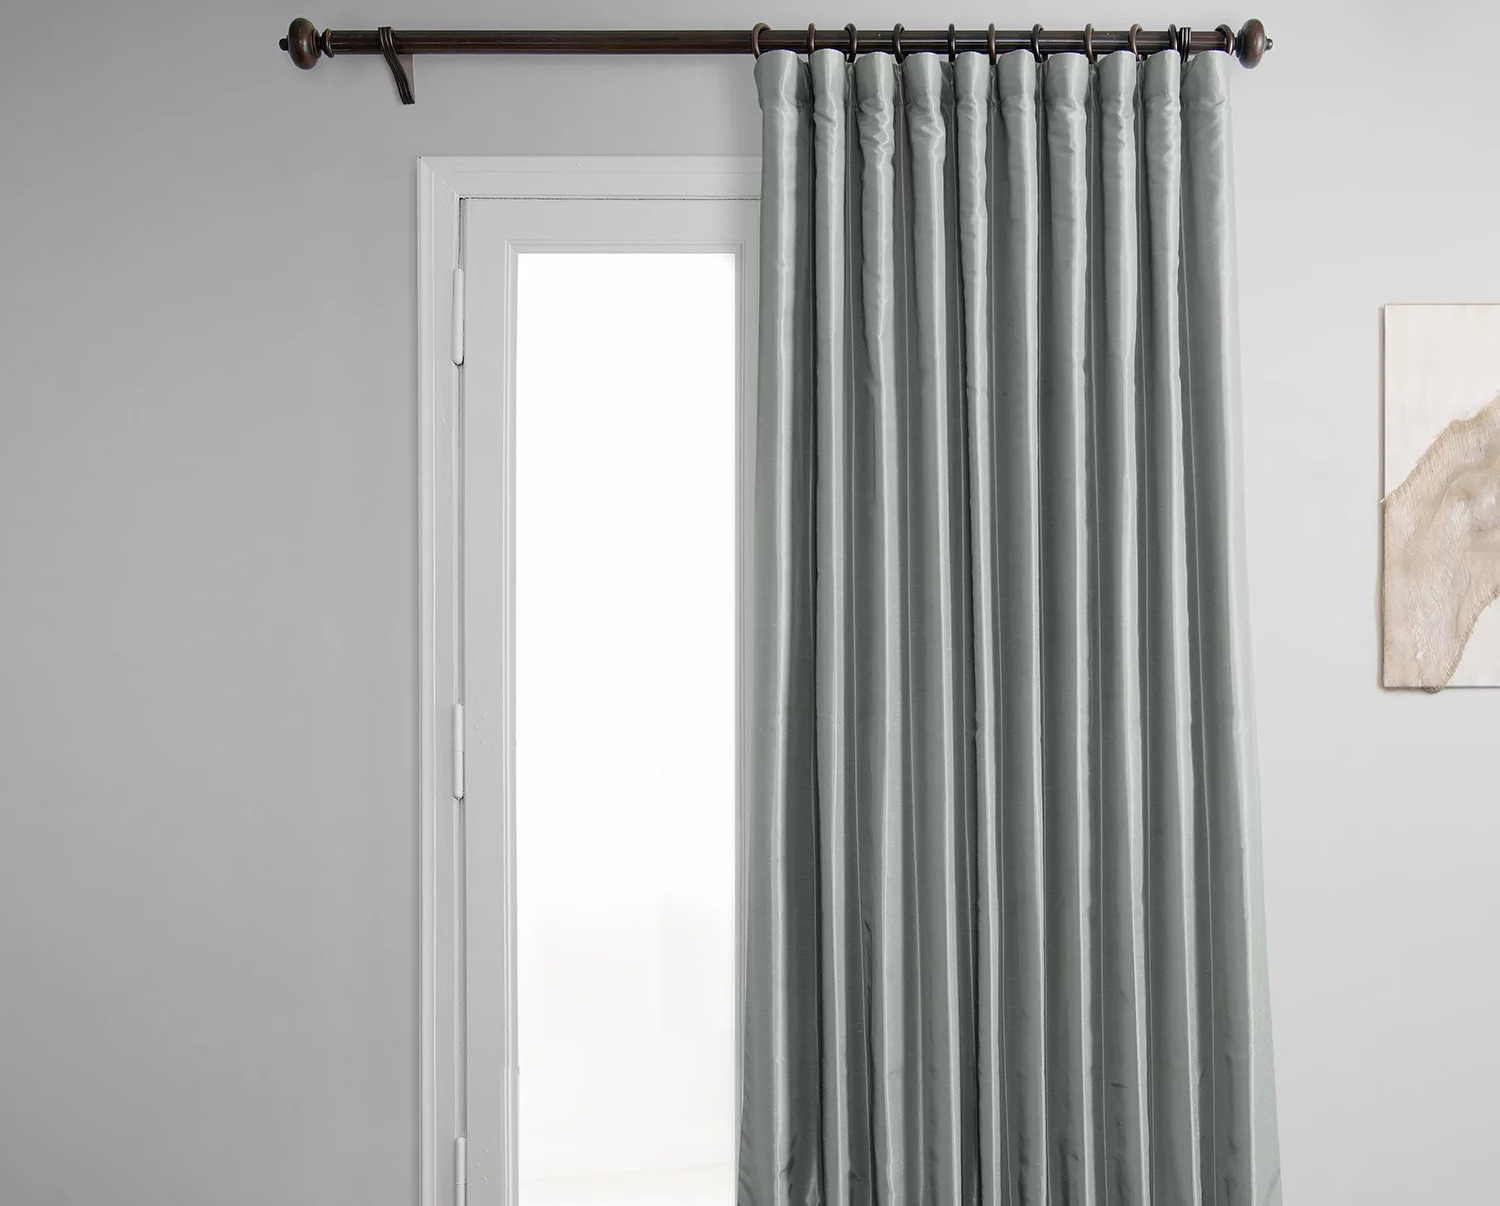 What Does 1 Panel Of Curtains Mean